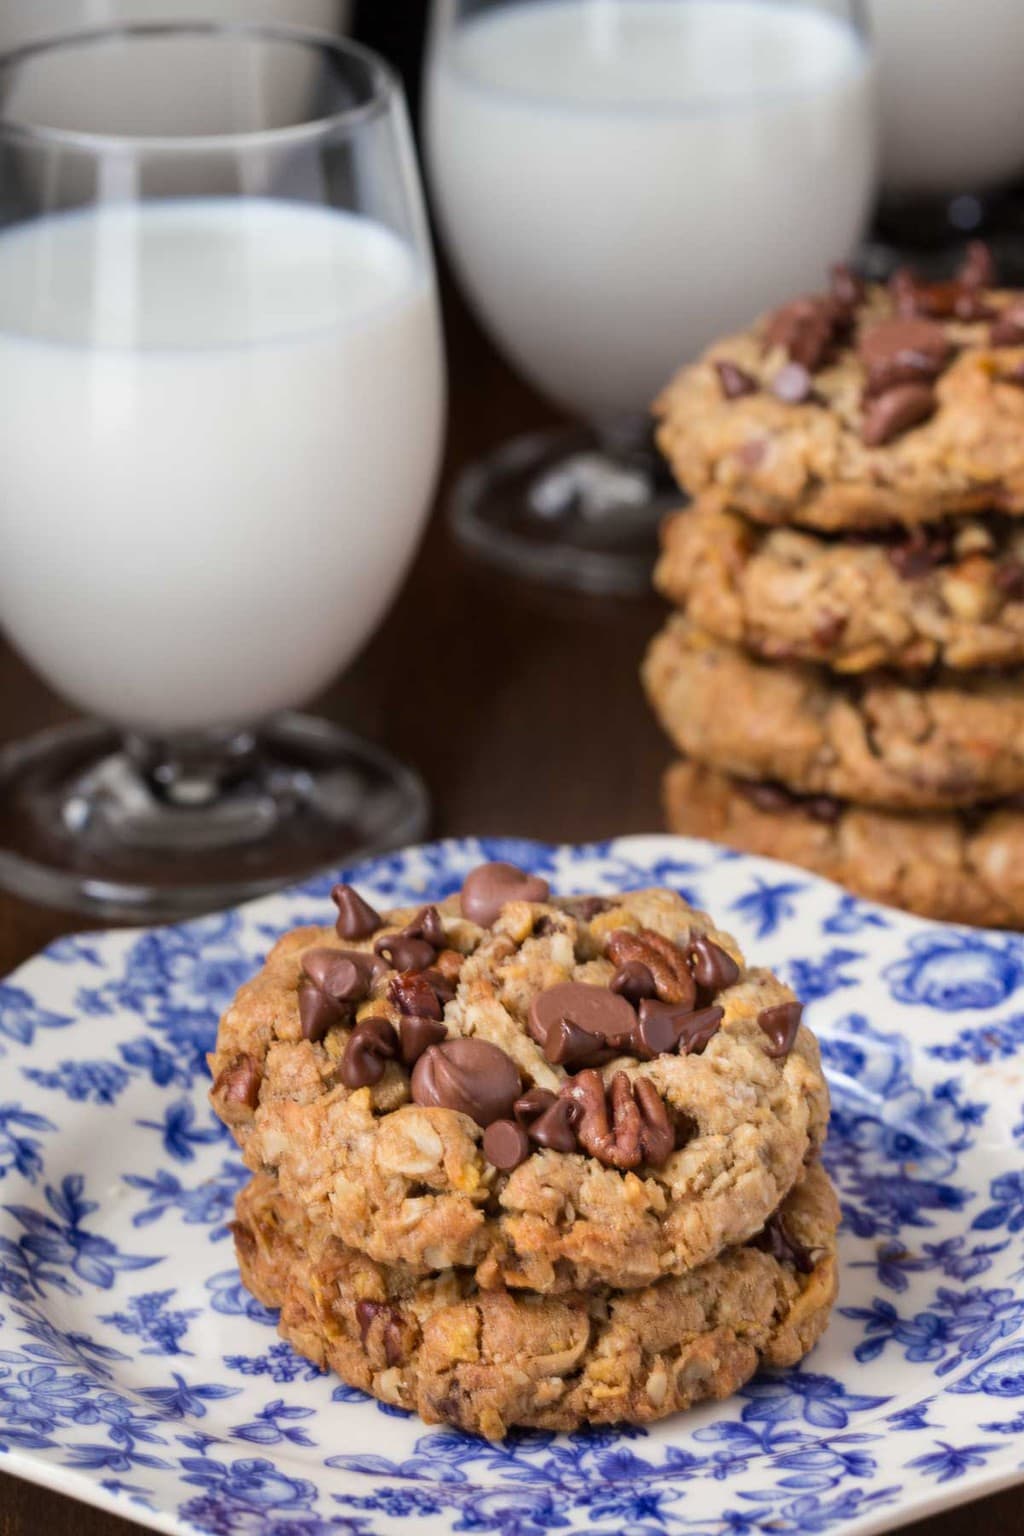 Vertical picture of Toffee Cowboy Cookies on a blue and white plate with glasses of milk.